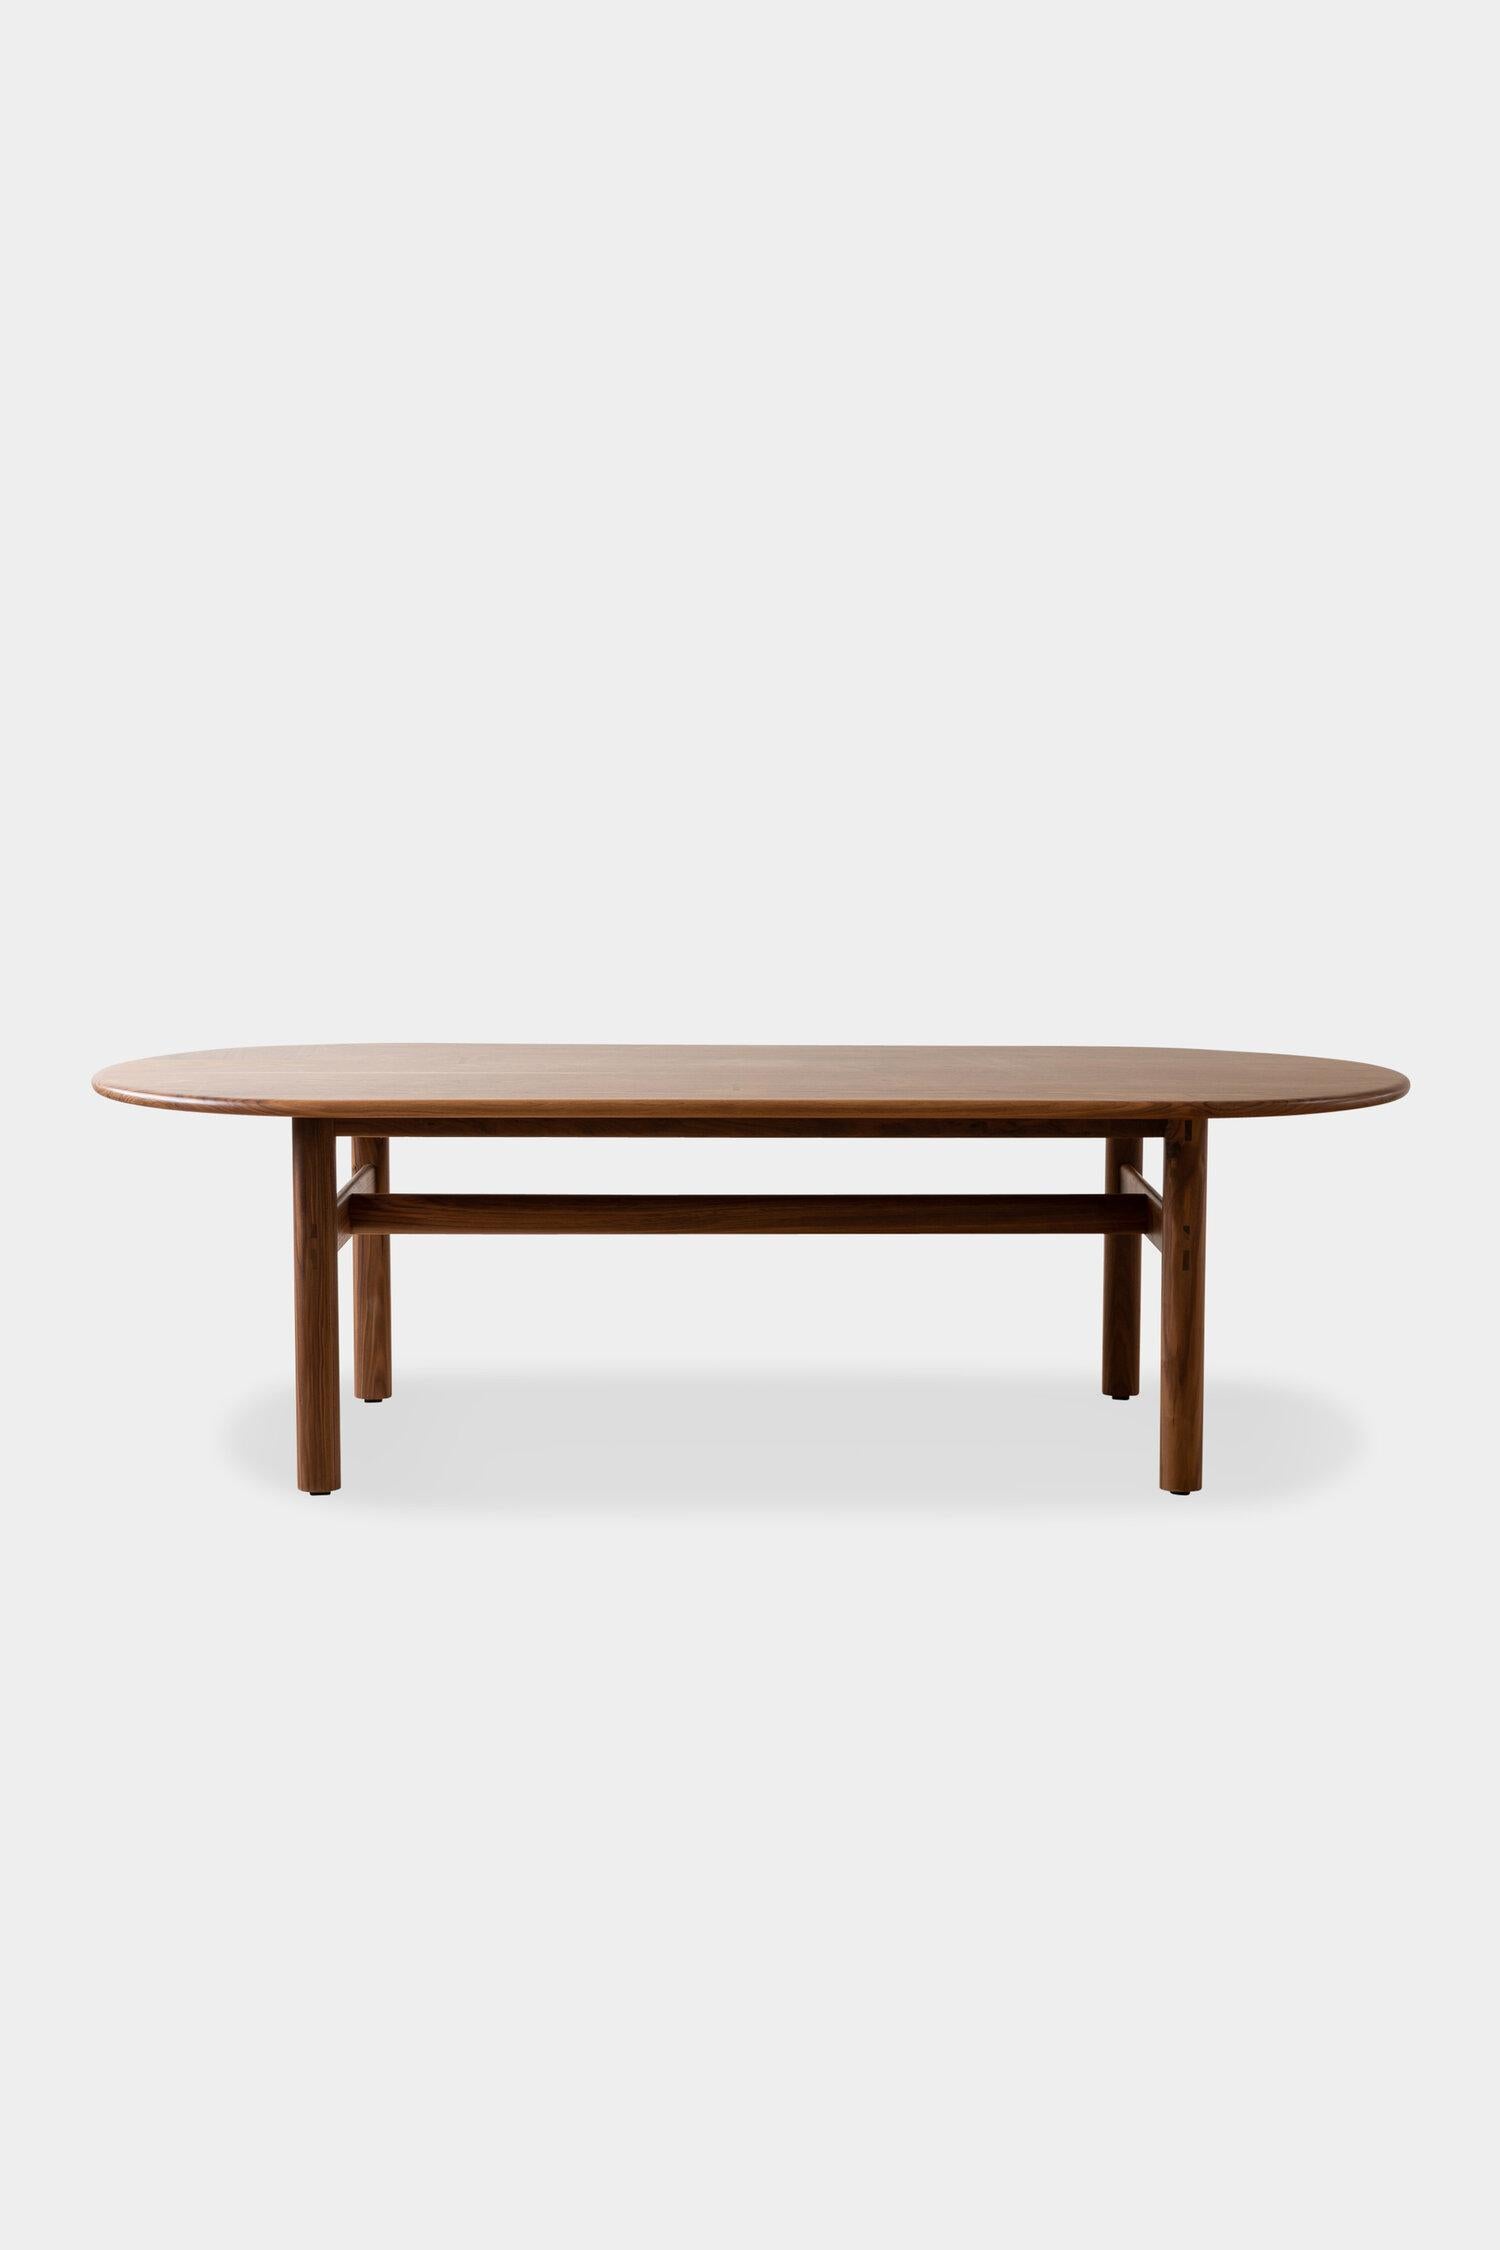 American EARL Walnut Pill top bullnose edge Palang Dining Table For Sale